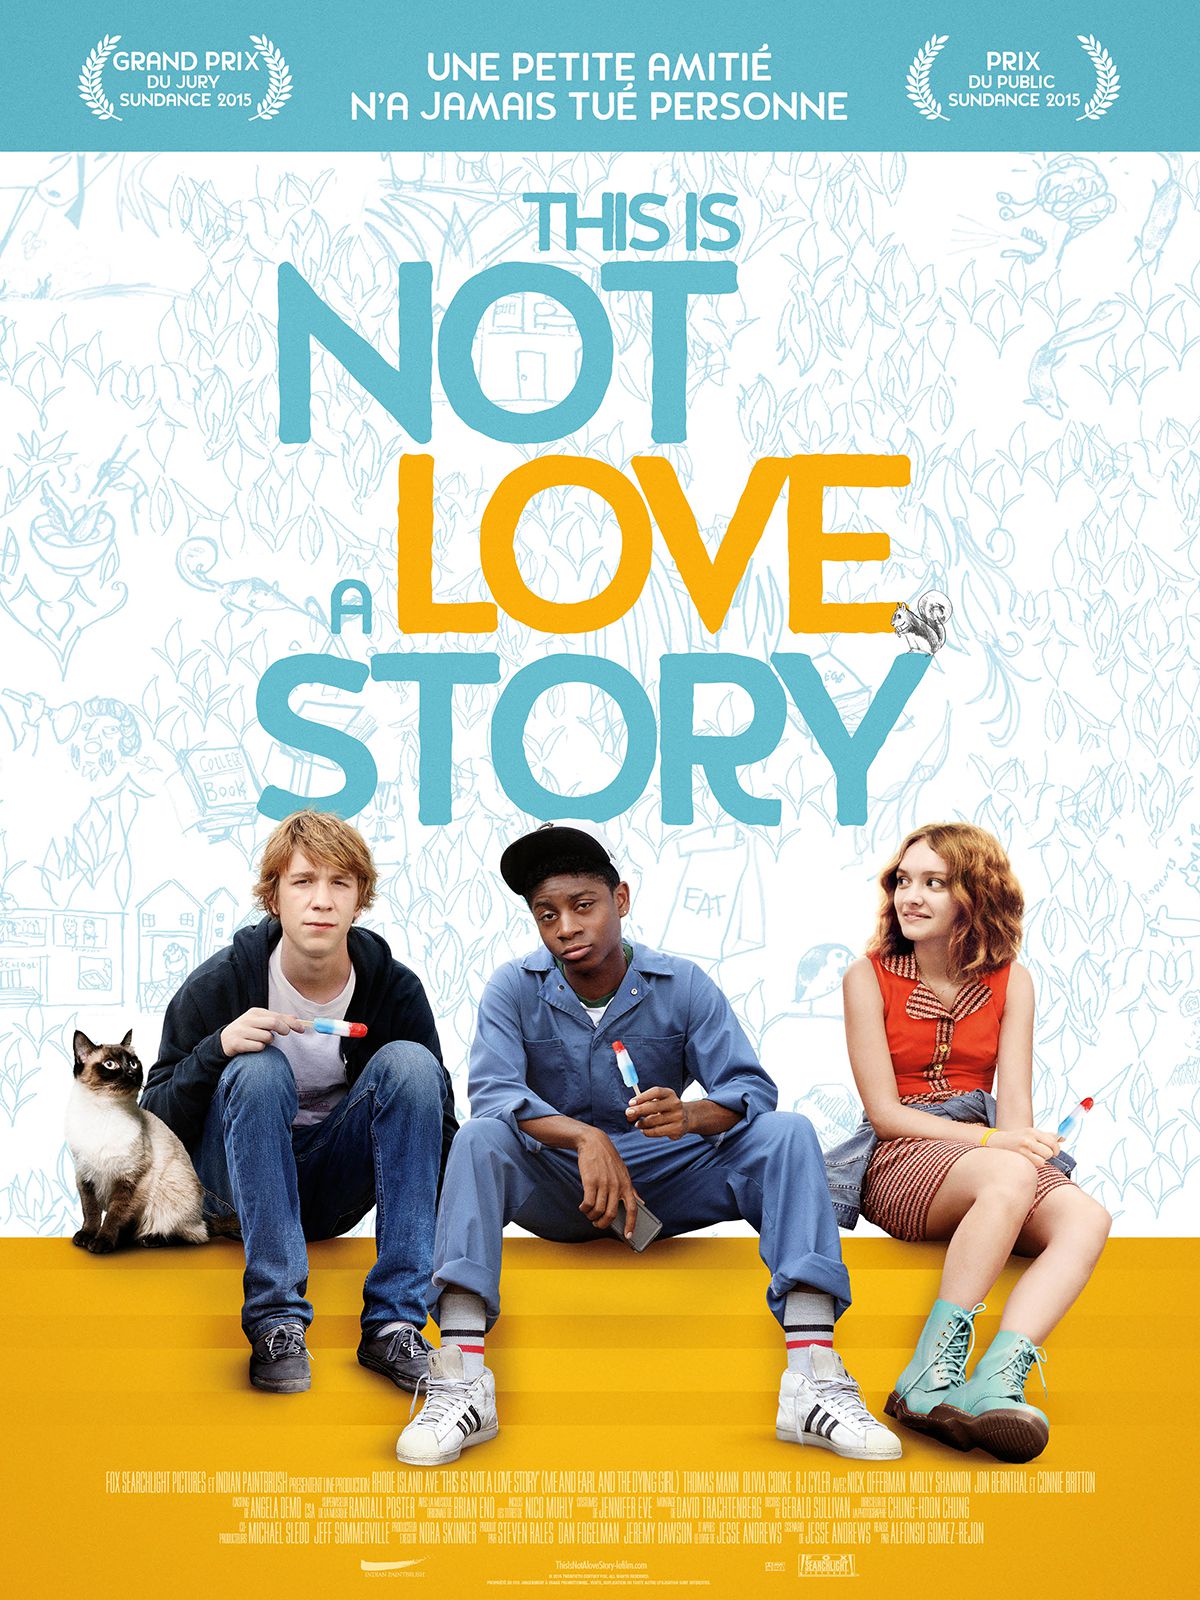 This Is Not A Love Story - Film (2015) streaming VF gratuit complet